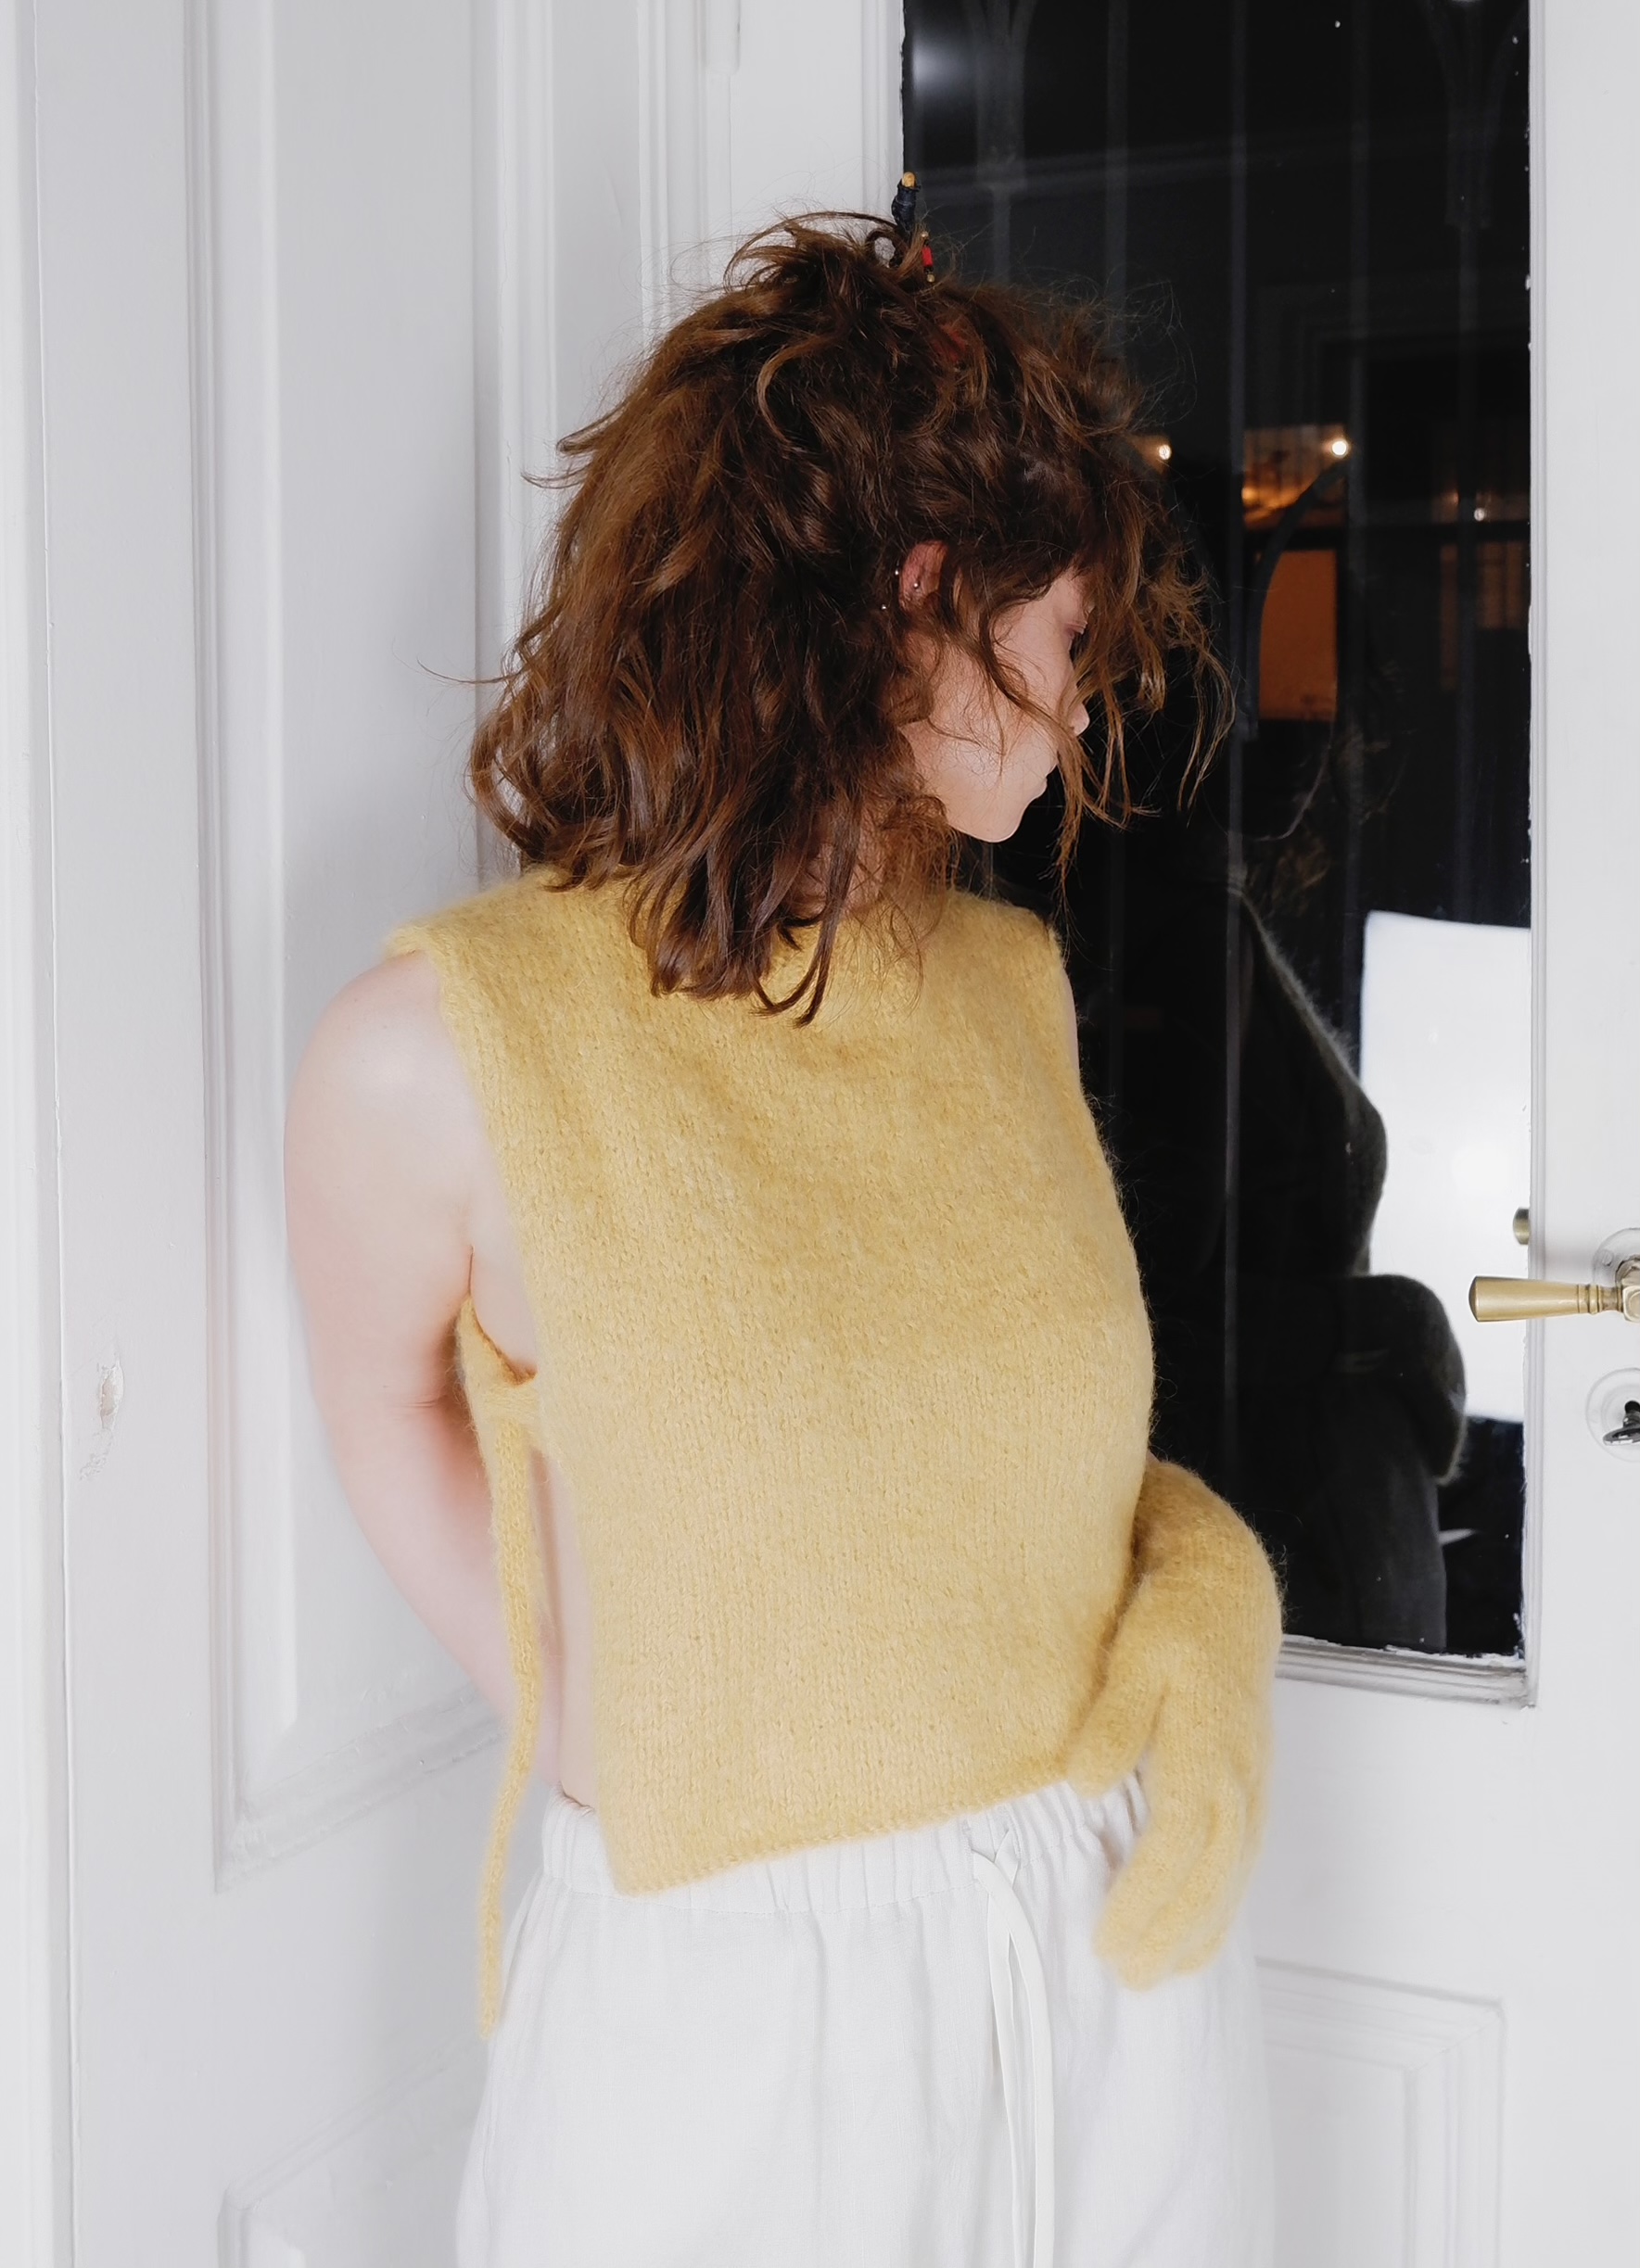 HANDMADE YELLOW KNITTED LACE TOP